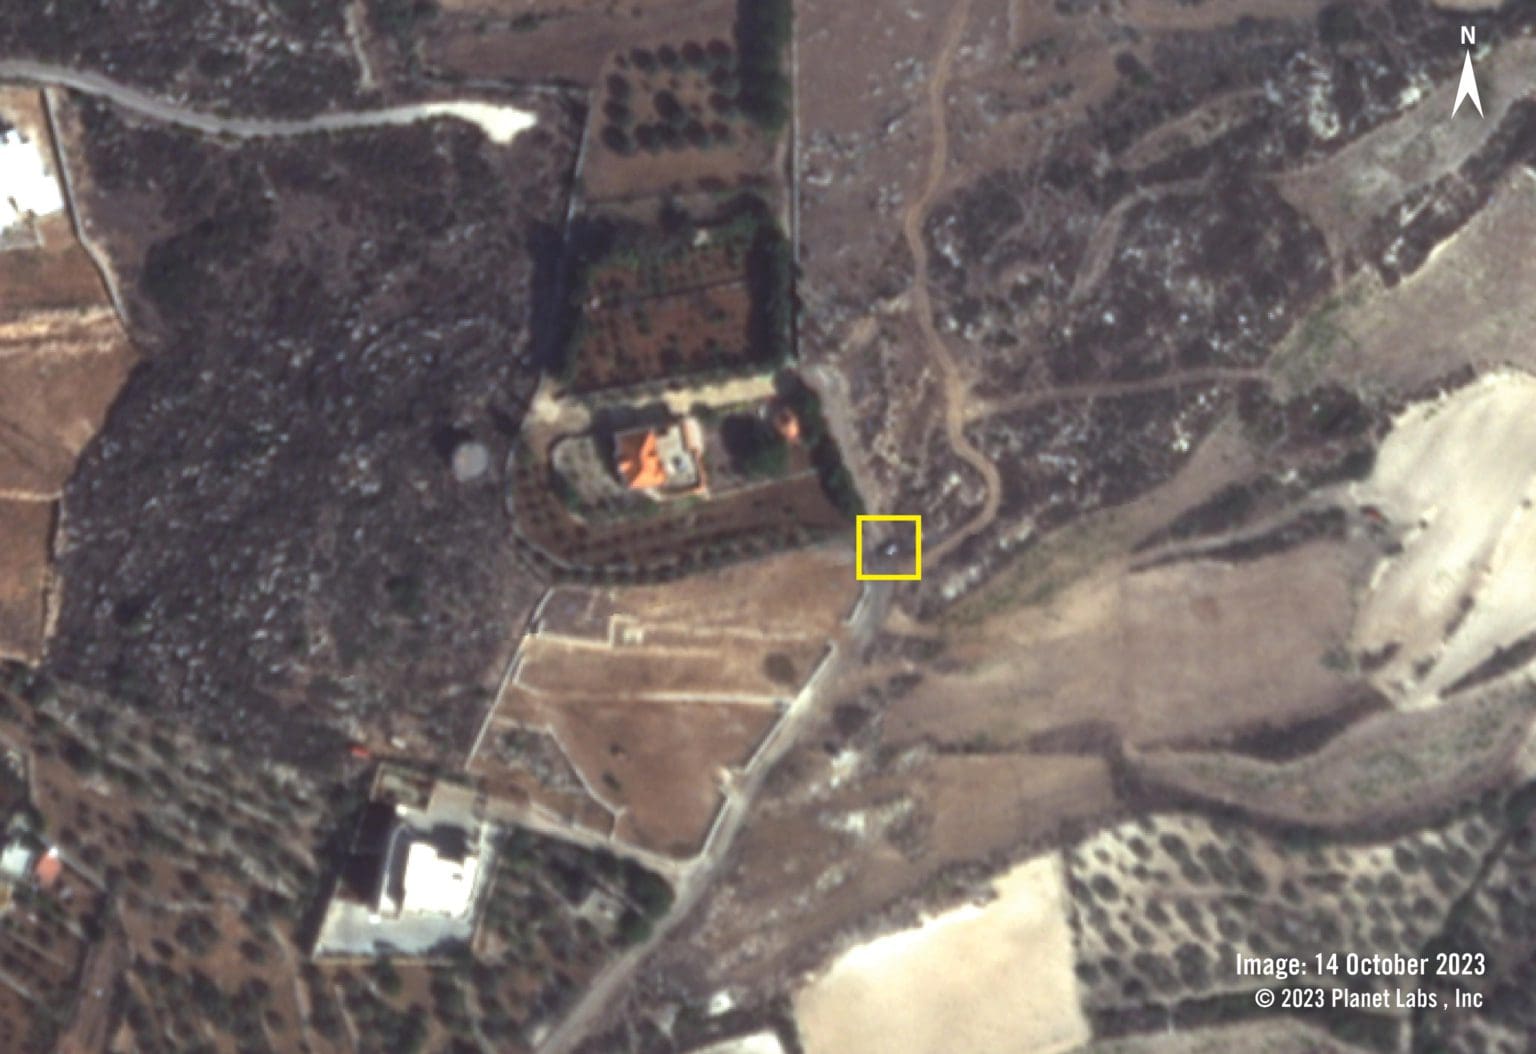 Satellite imagery from 14 October shows the burned vehicle on the road (yellow square).